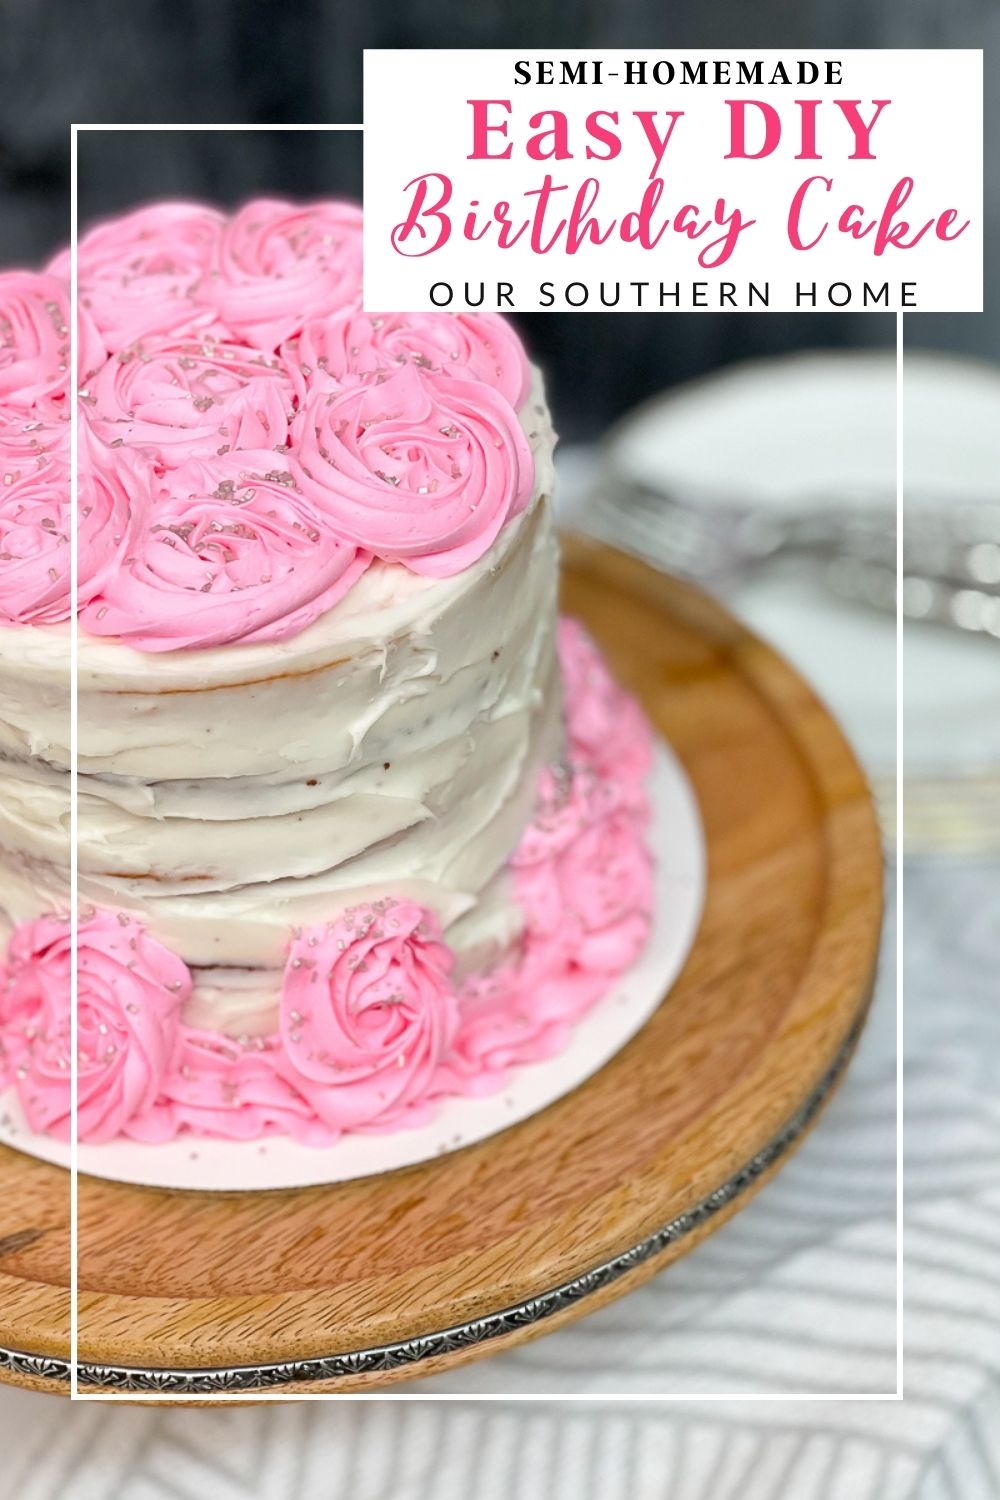 32 Inspired Mother's Day Cake Ideas | Our Baking Blog: Cake, Cookie &  Dessert Recipes by Wilton